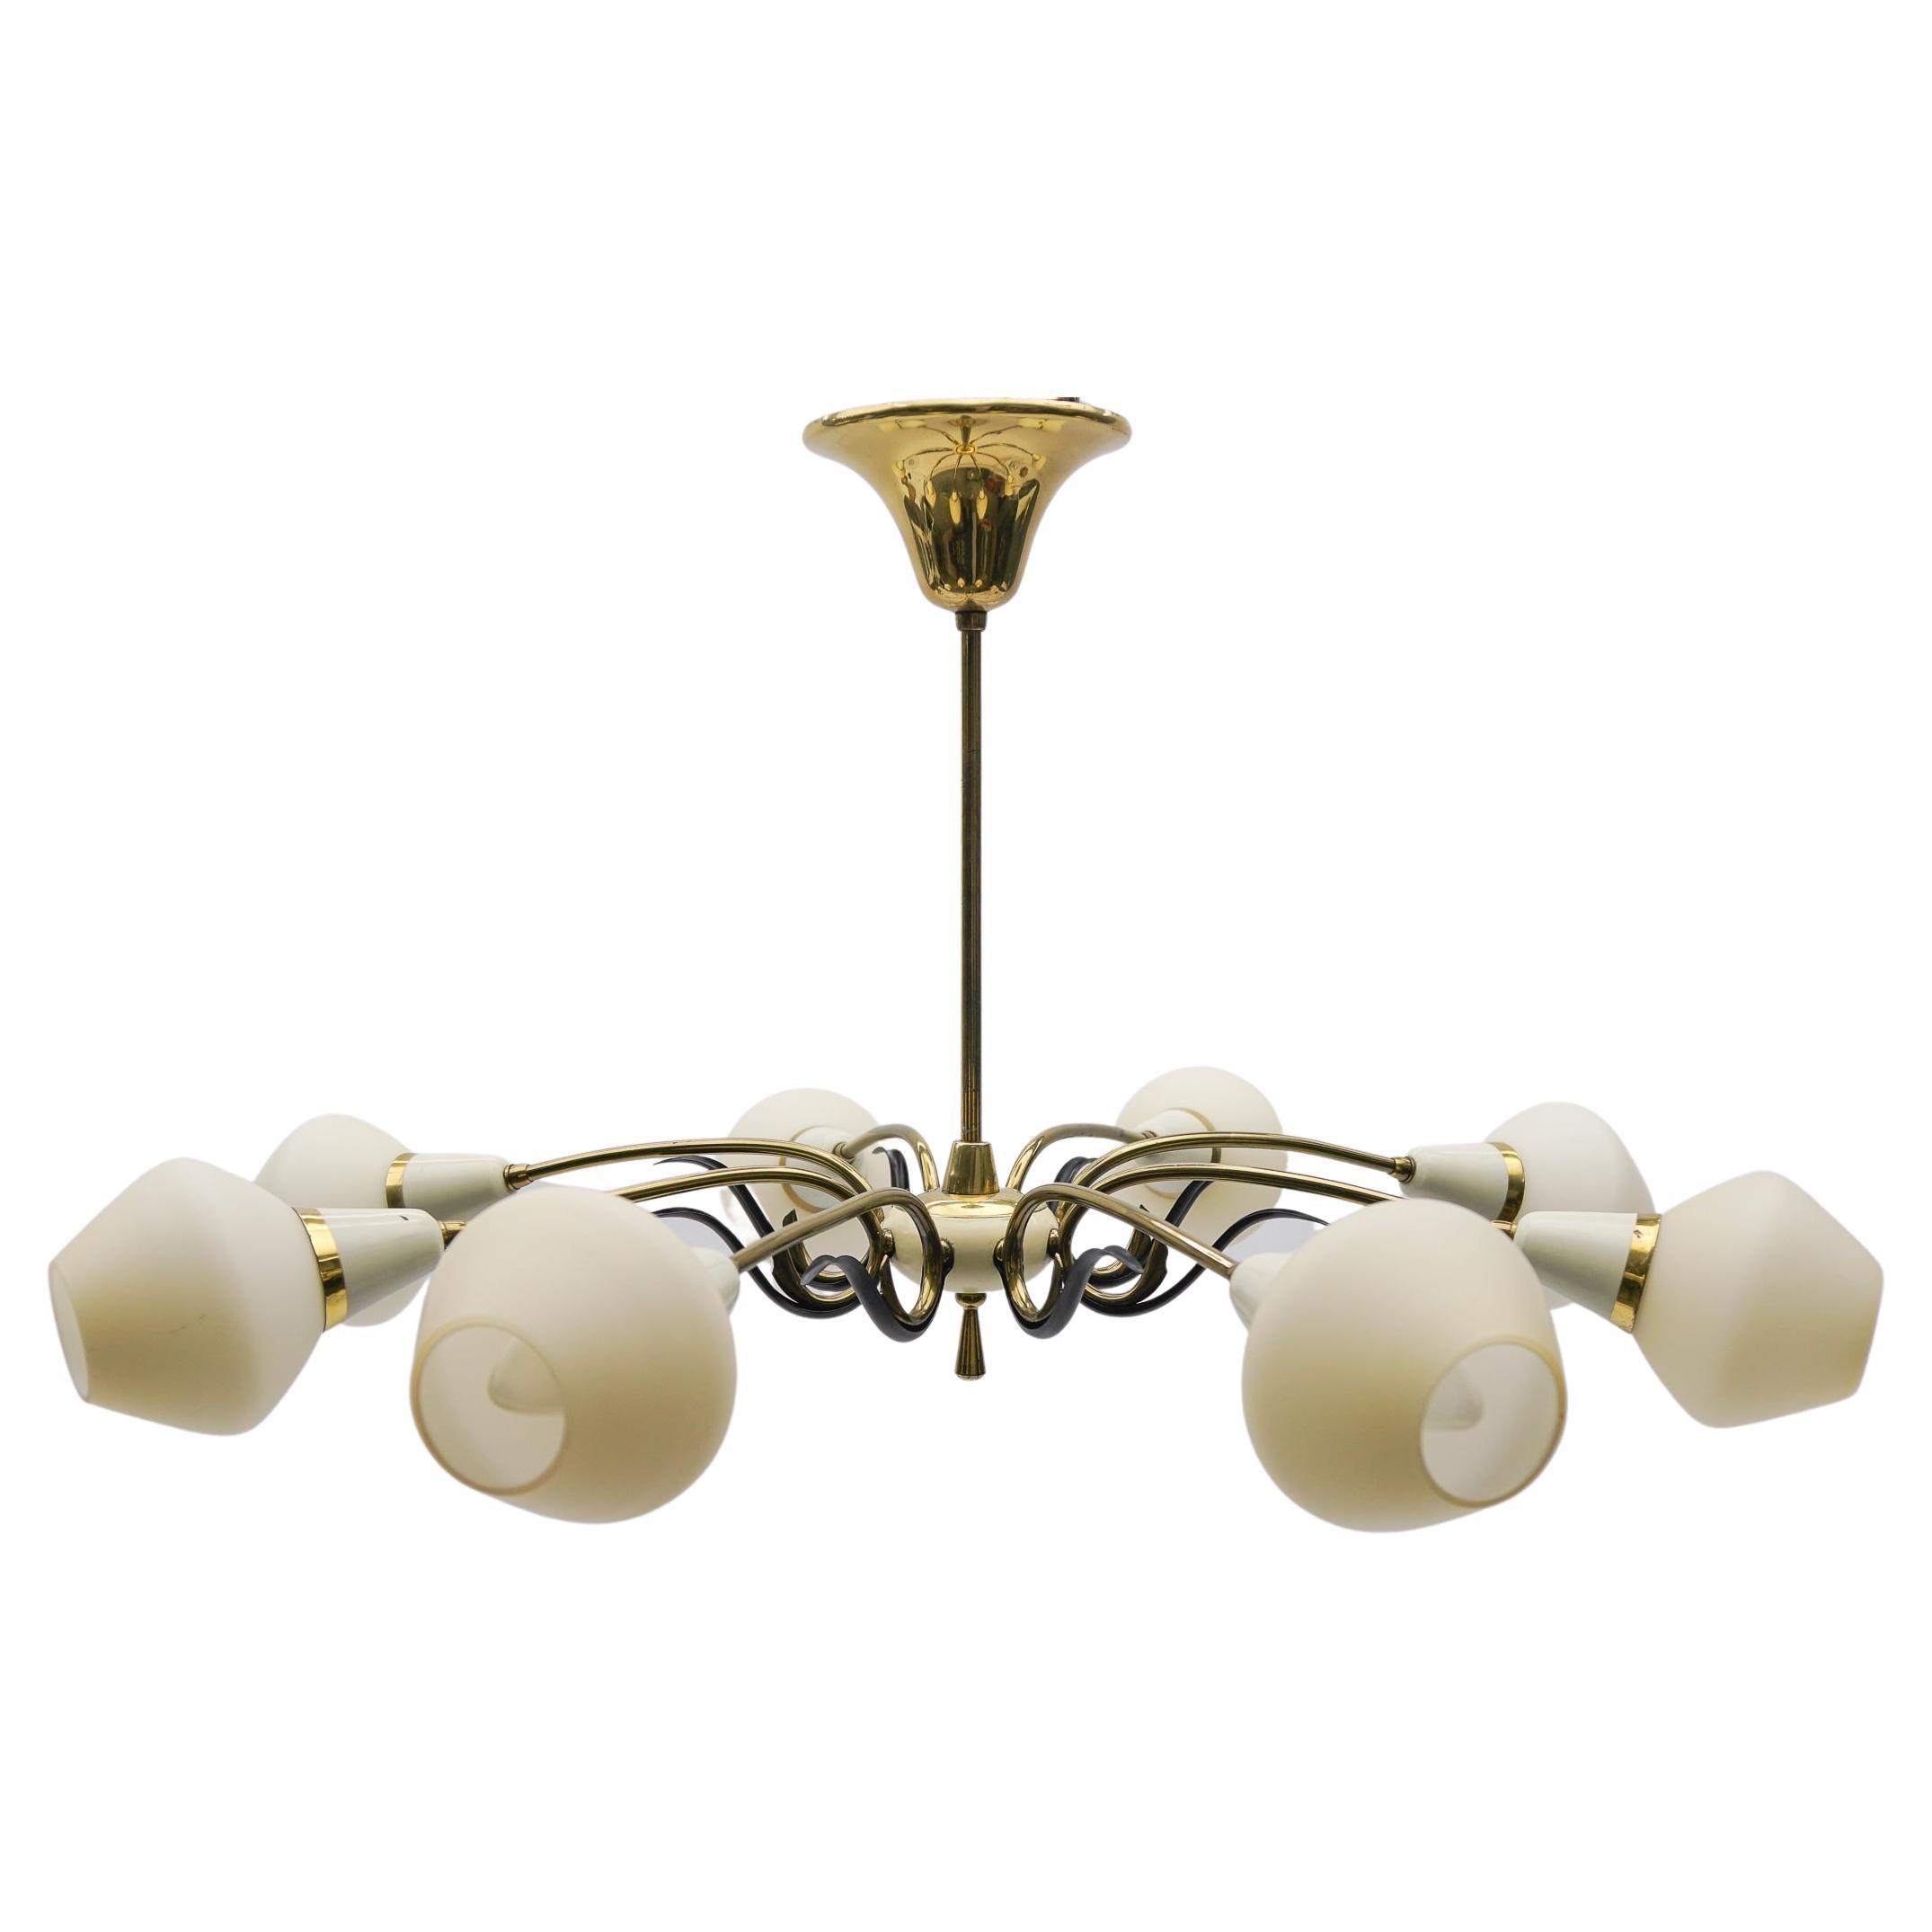 Ceiling 8-Light Sputnik Lamp in the Style of Arteluce, Italy 1950s For Sale